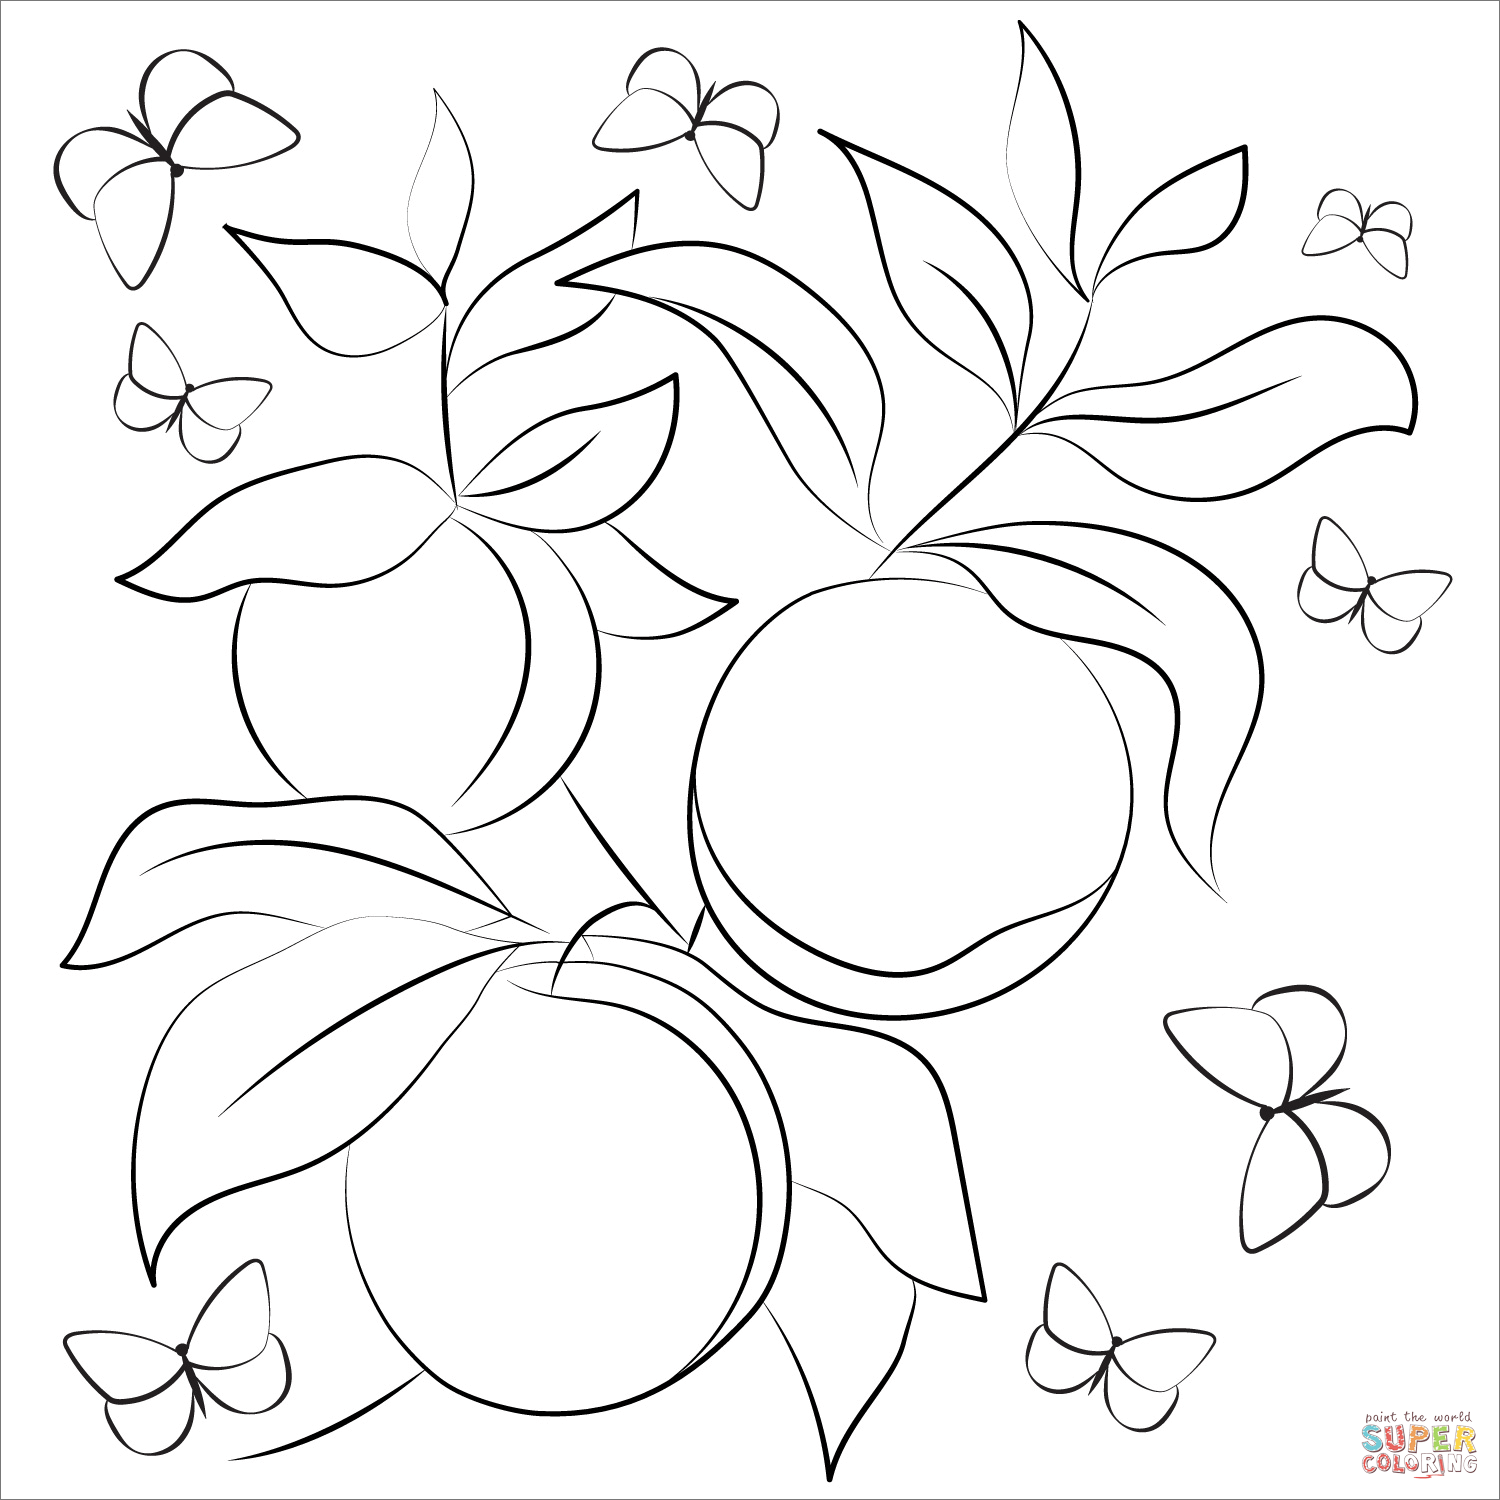 Peach coloring page | Free Printable Coloring Pages